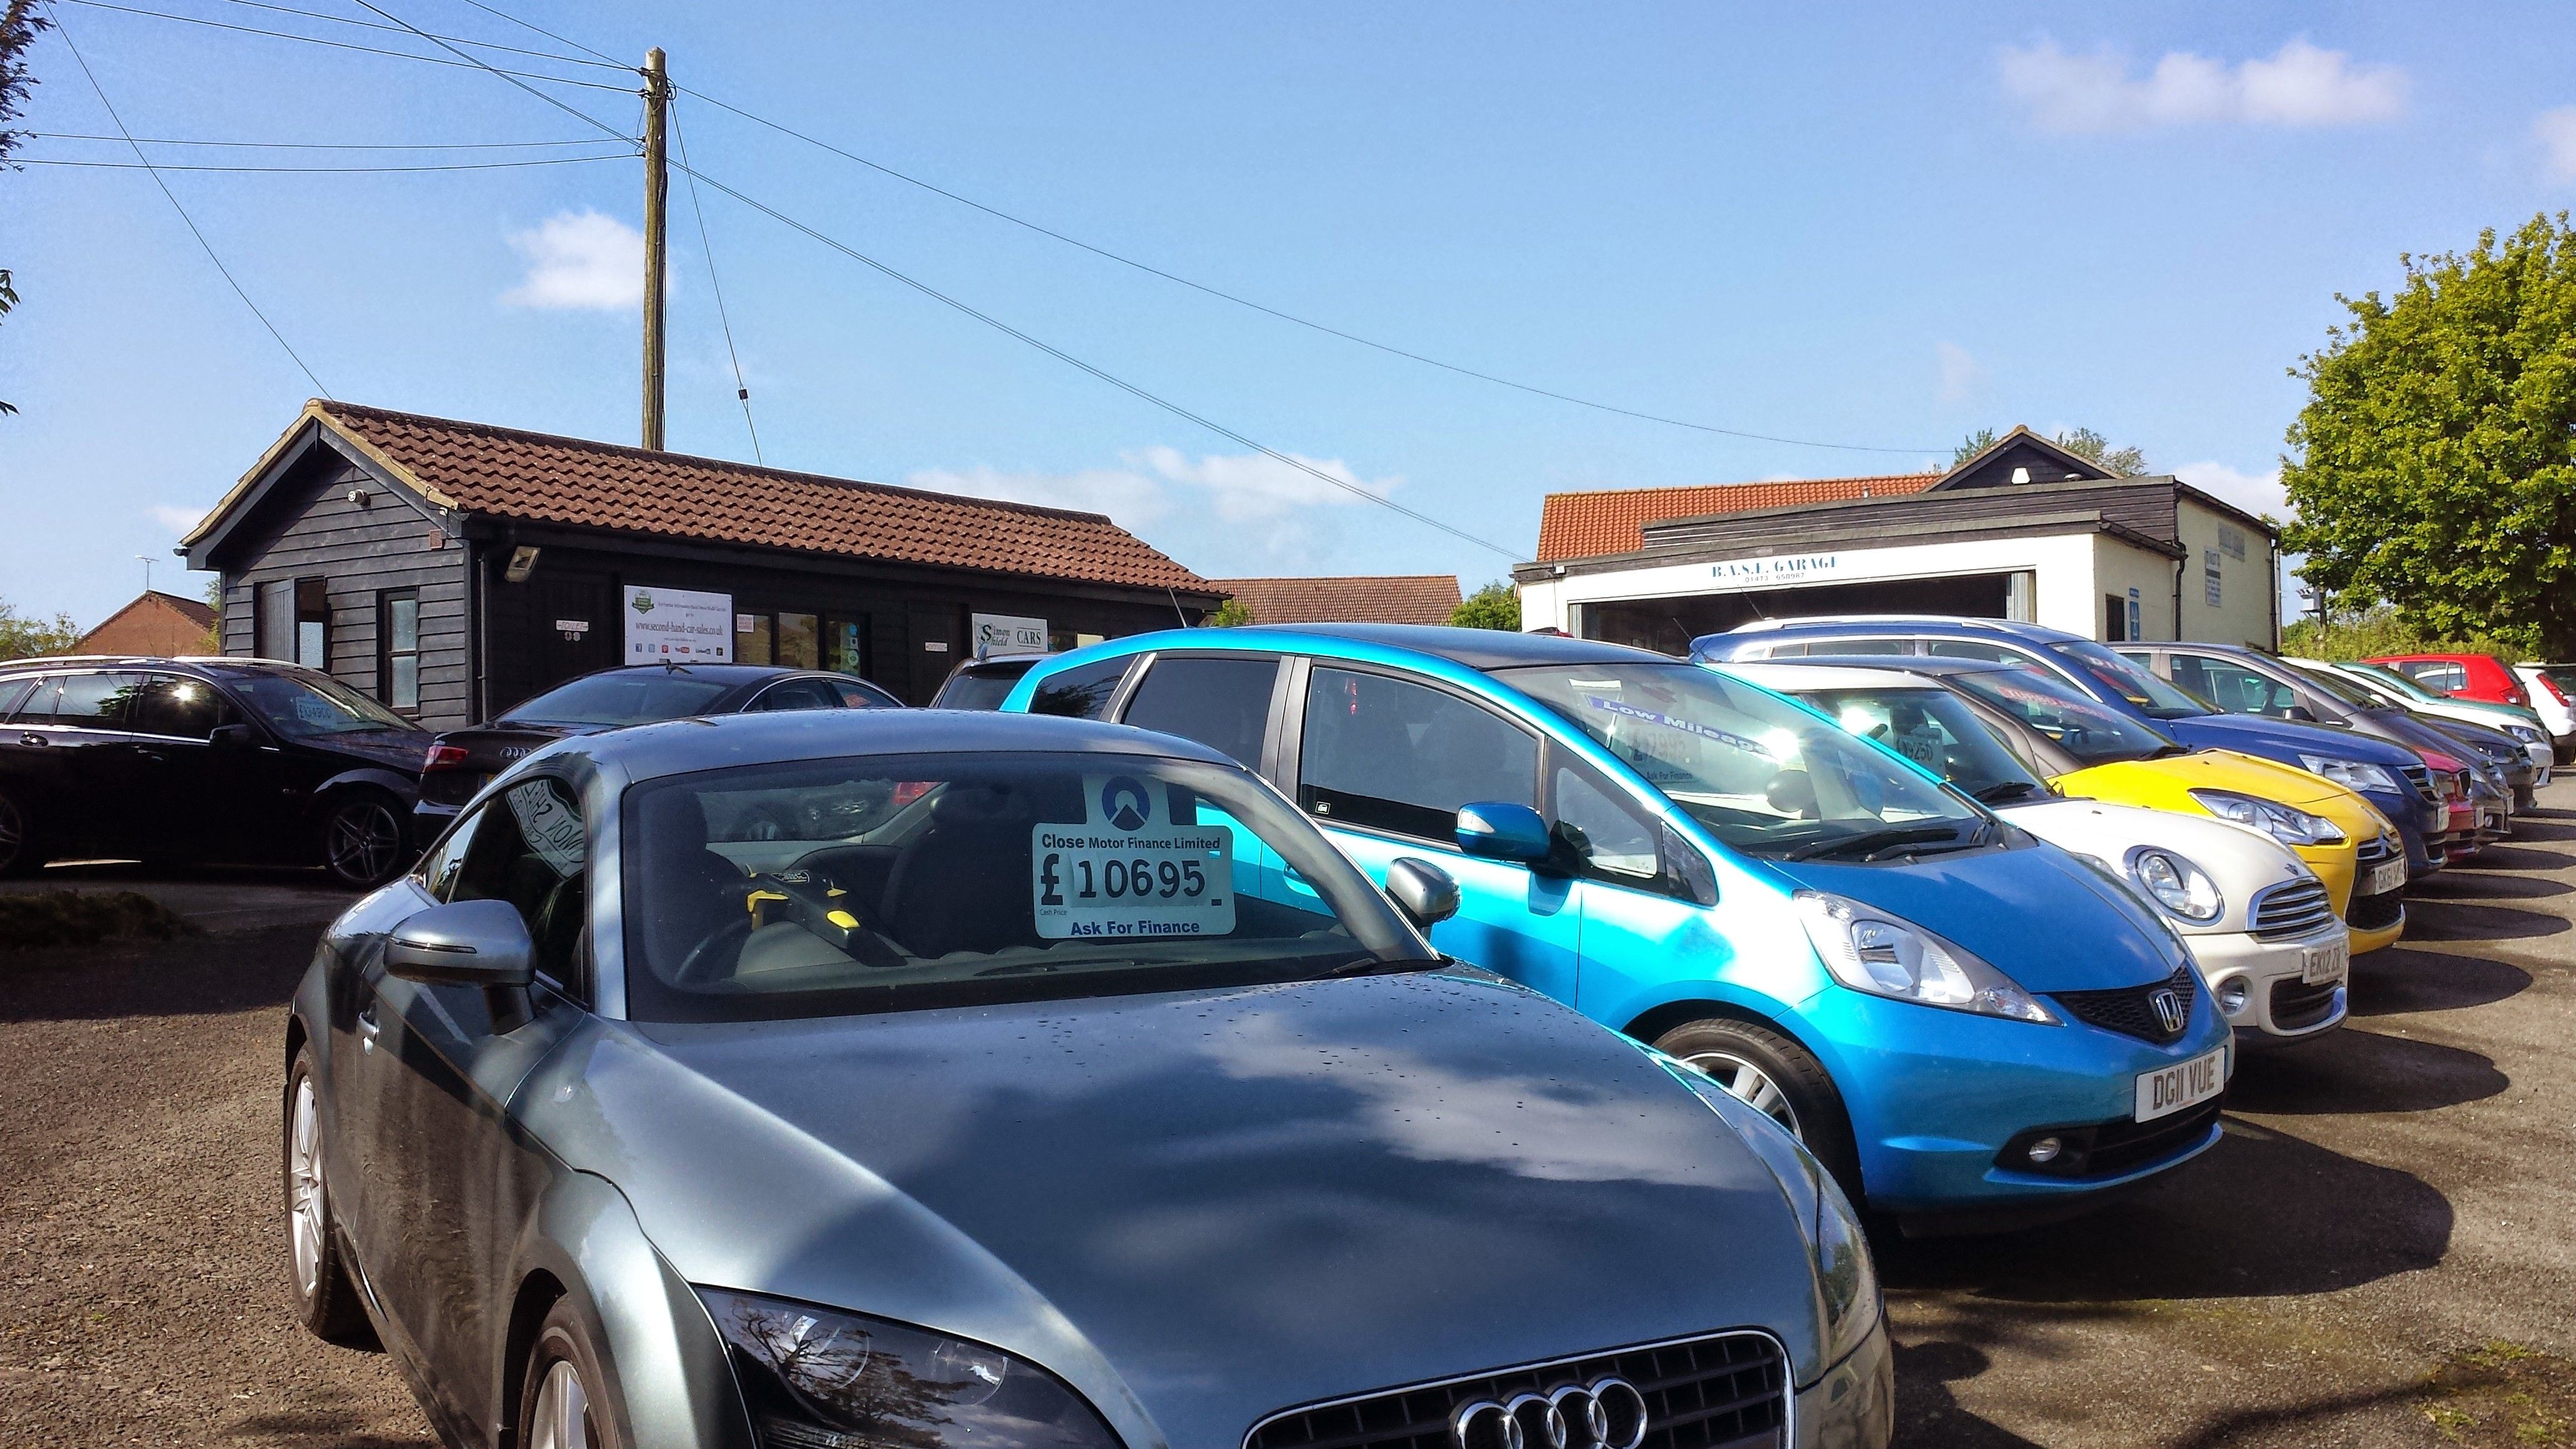 Simon Shield Cars used cars: man arrested Ipswich